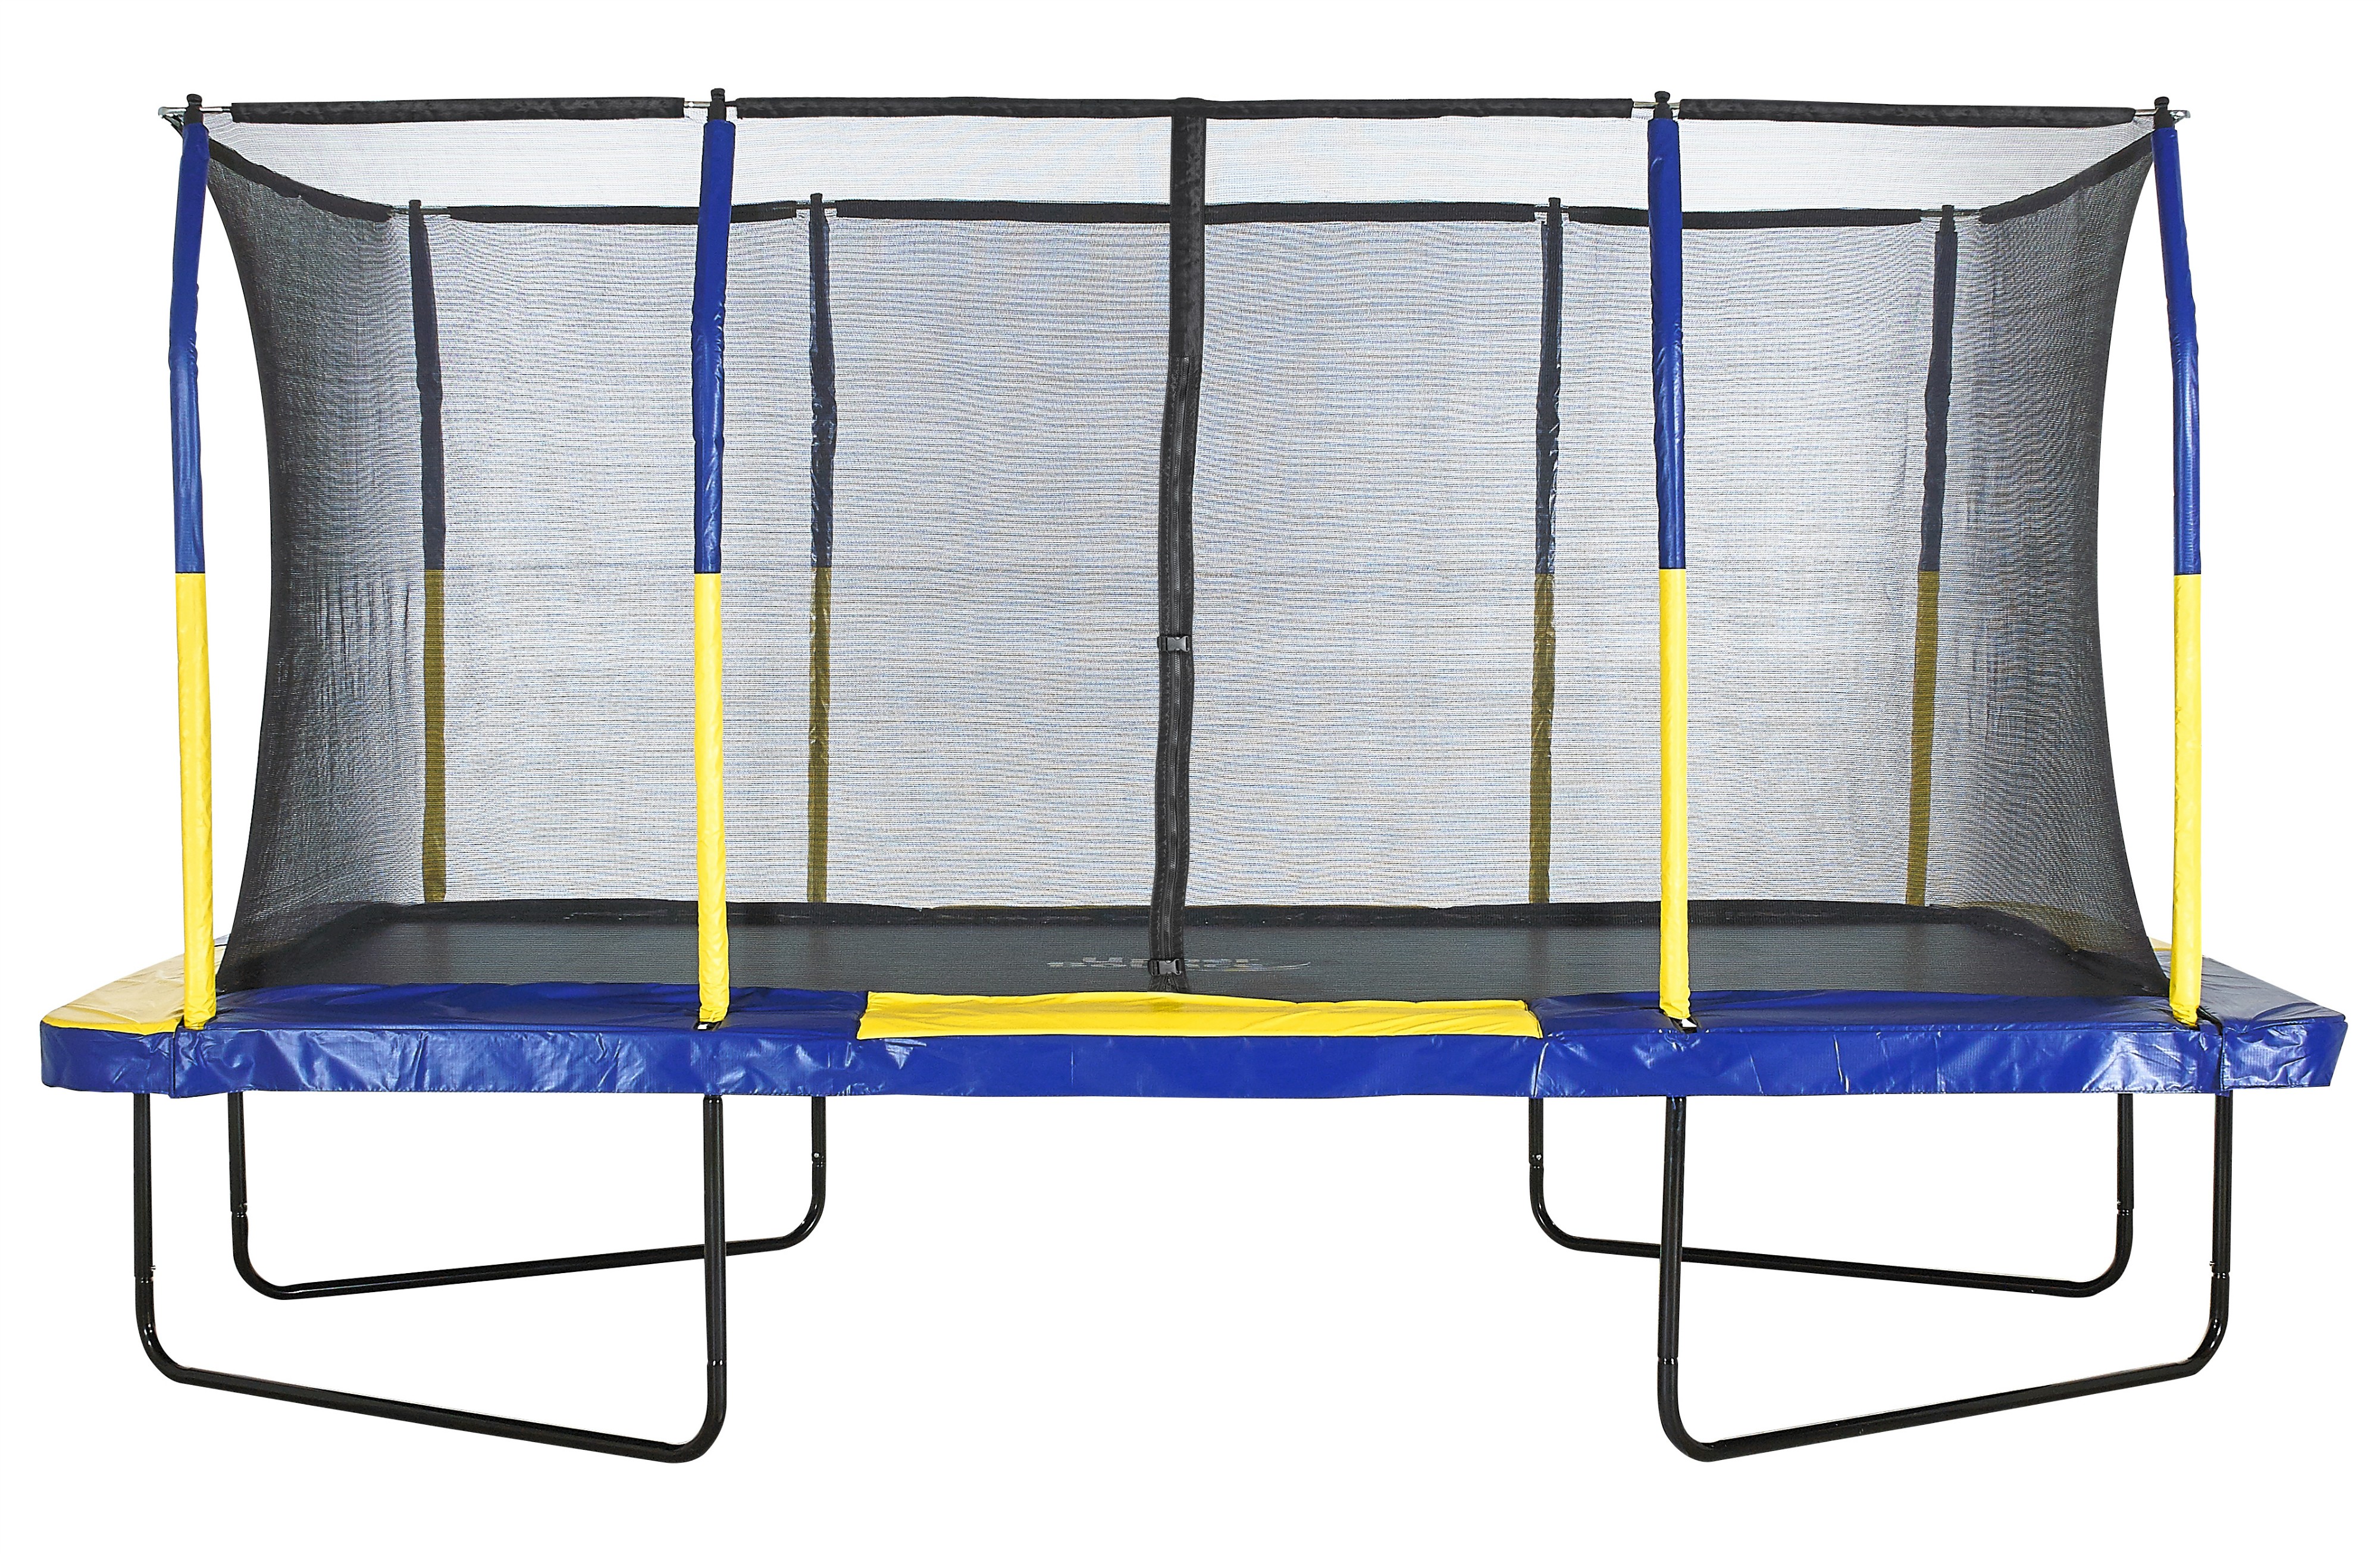 9x15ft. Large Rectangle Trampoline | Professional Outdoor & Garden Rectangular Trampoline for Adults, Kids